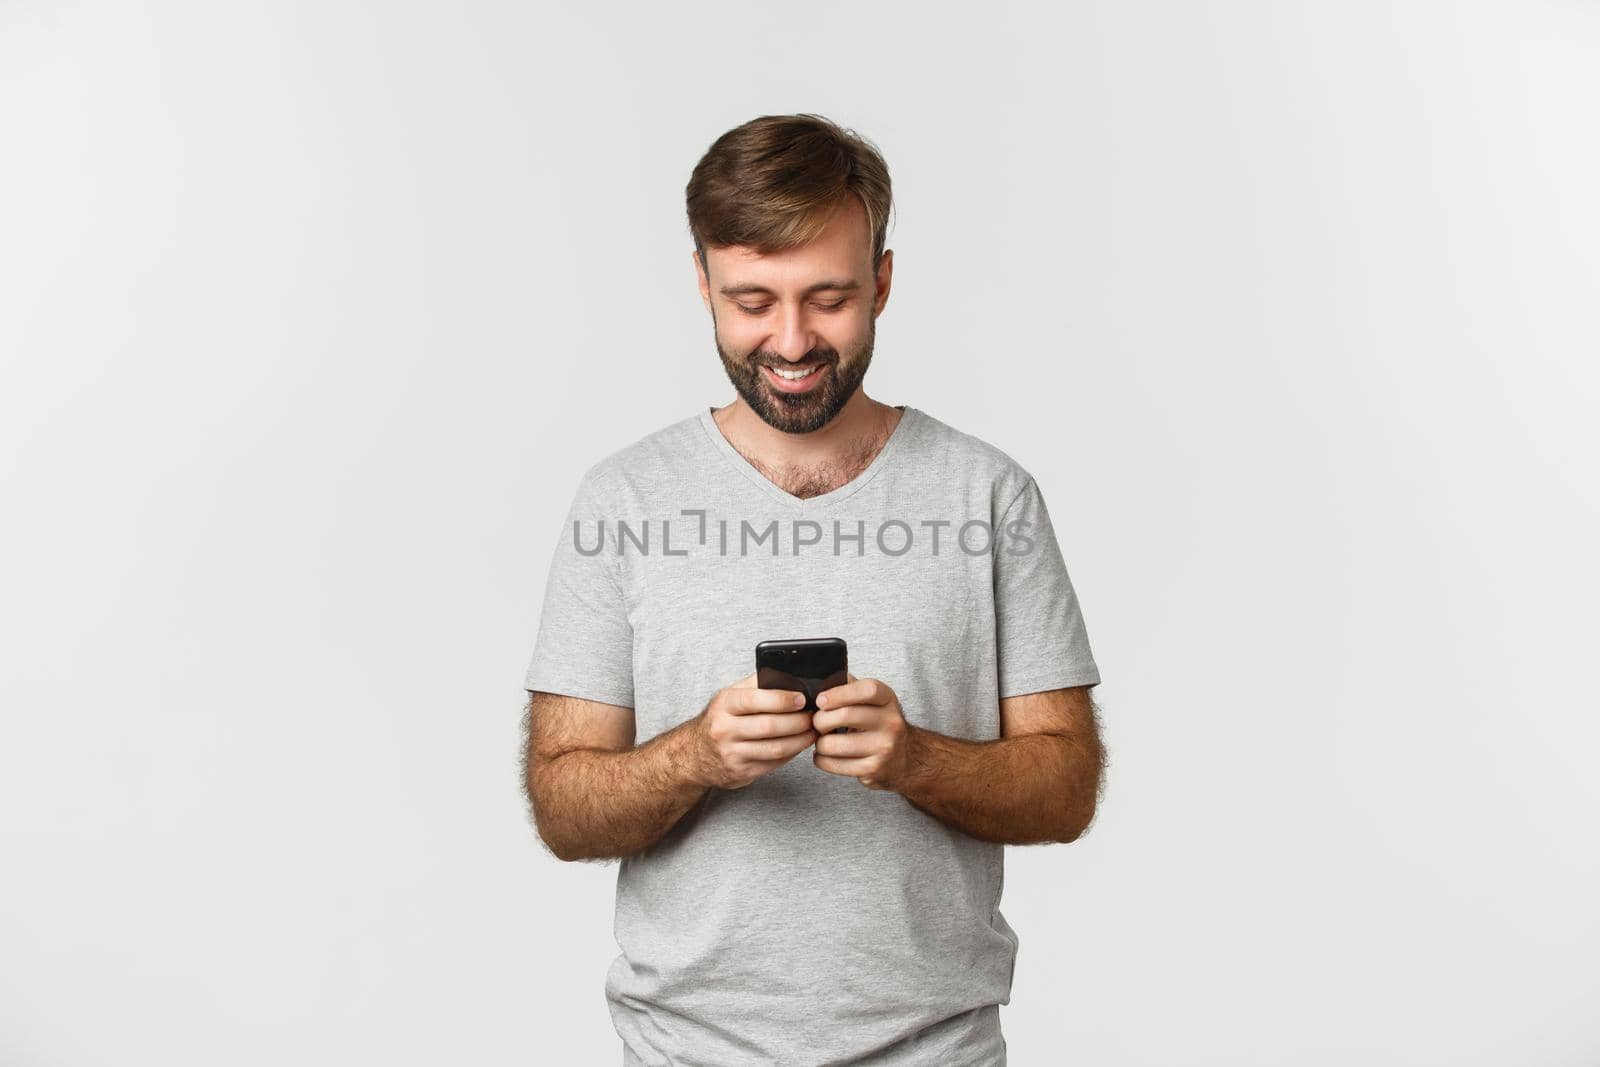 Portrait of handsome modern guy with beard, messaging and looking at smartphone screen, standing over white background.